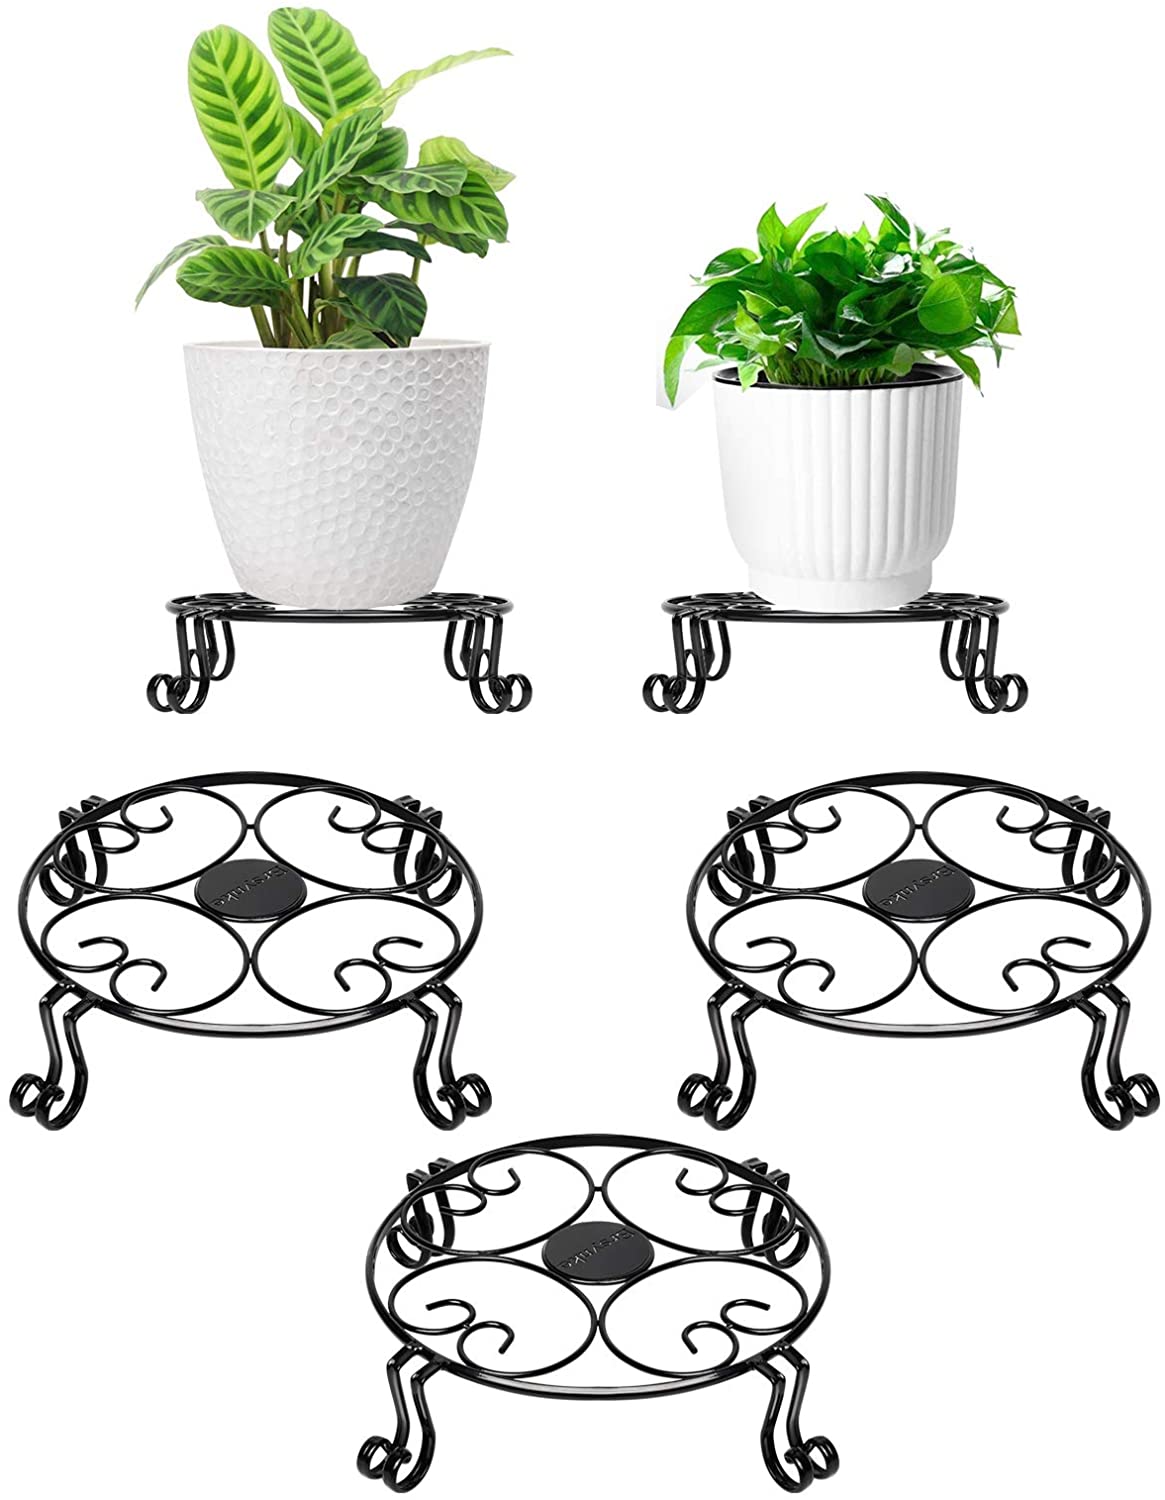 3-pack Decorative Round Plant Stand for for $17.49